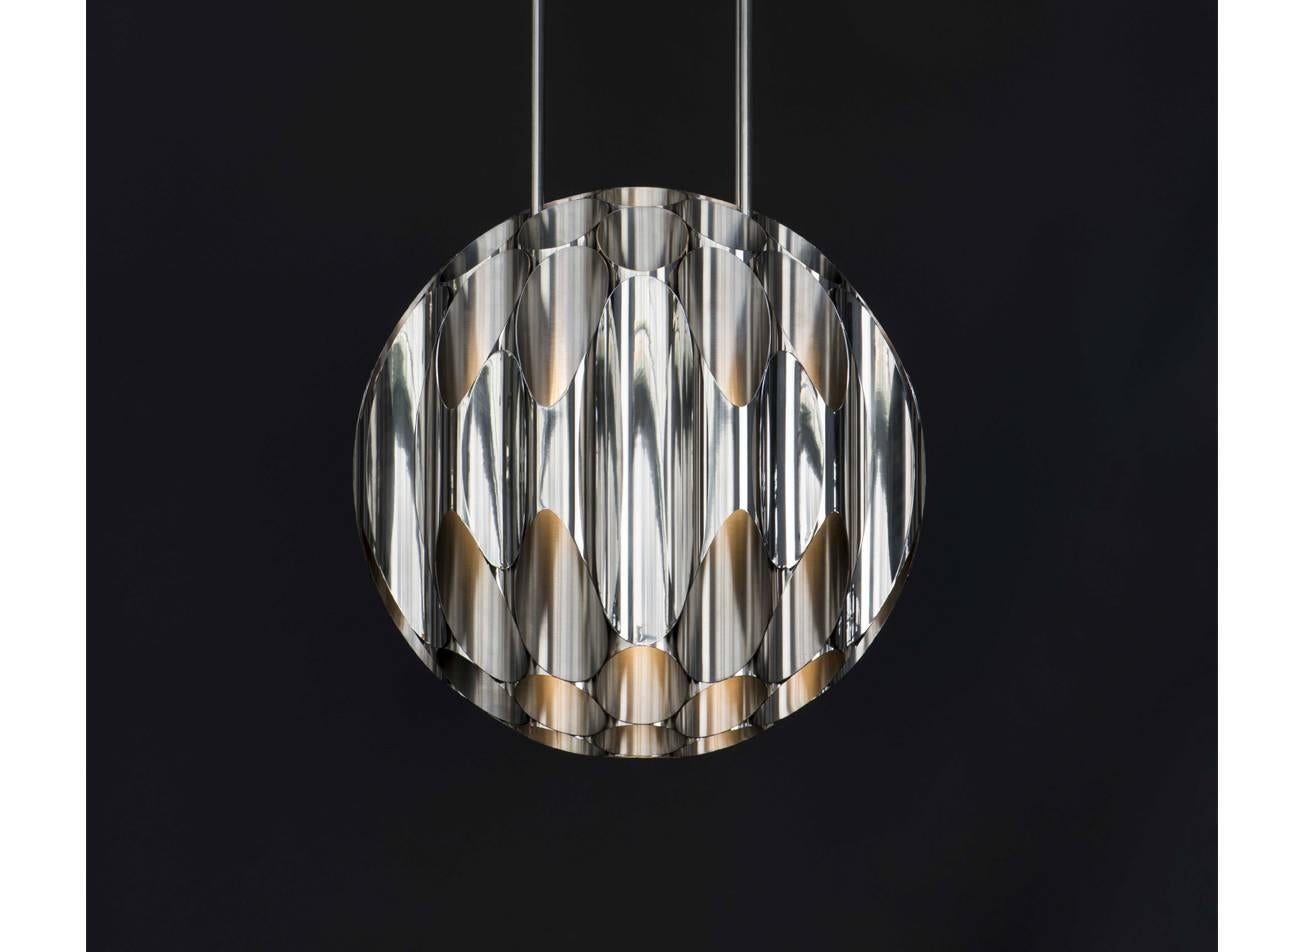 Apollonius chandelier
Designed by Emmanuel Bossuet
Made of stainless steel
Height: Custom
Dia. 73cm.